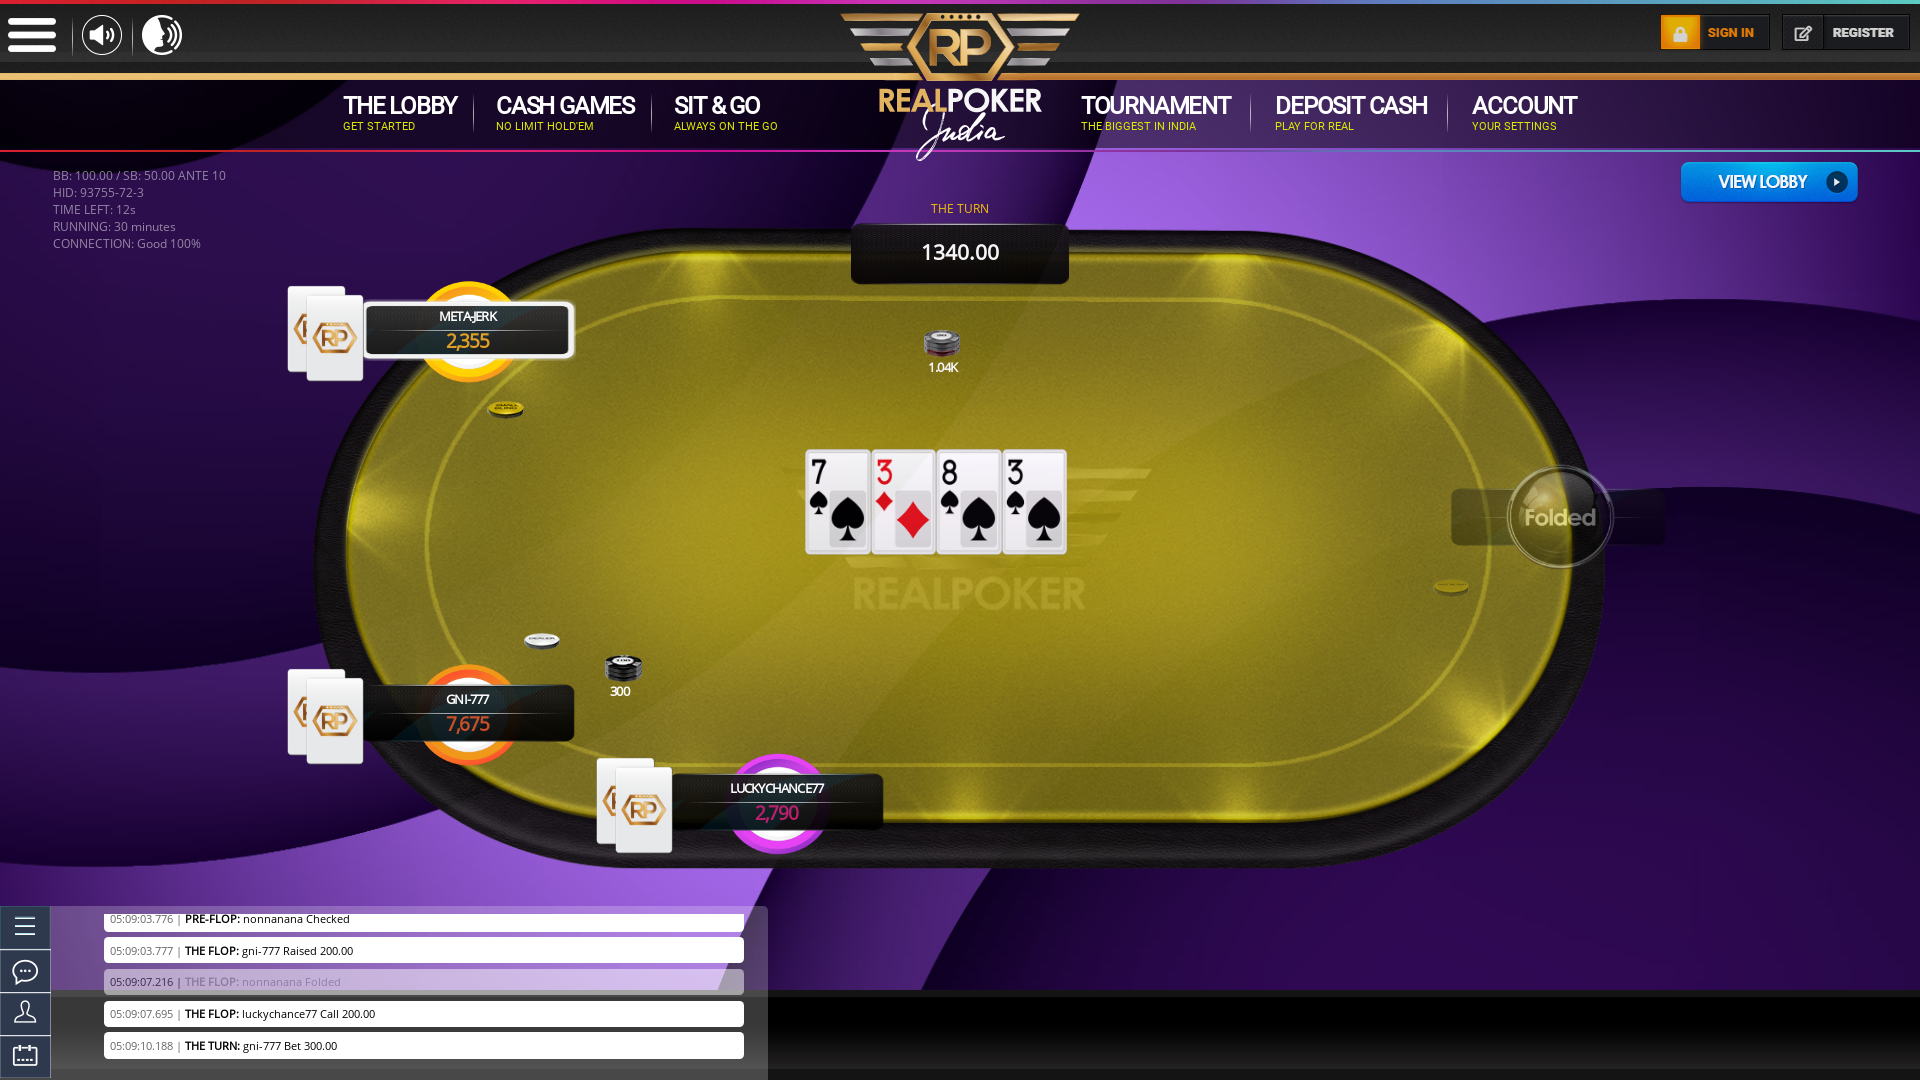 Salce poker table on a 10 player table in the 30th minute of the game